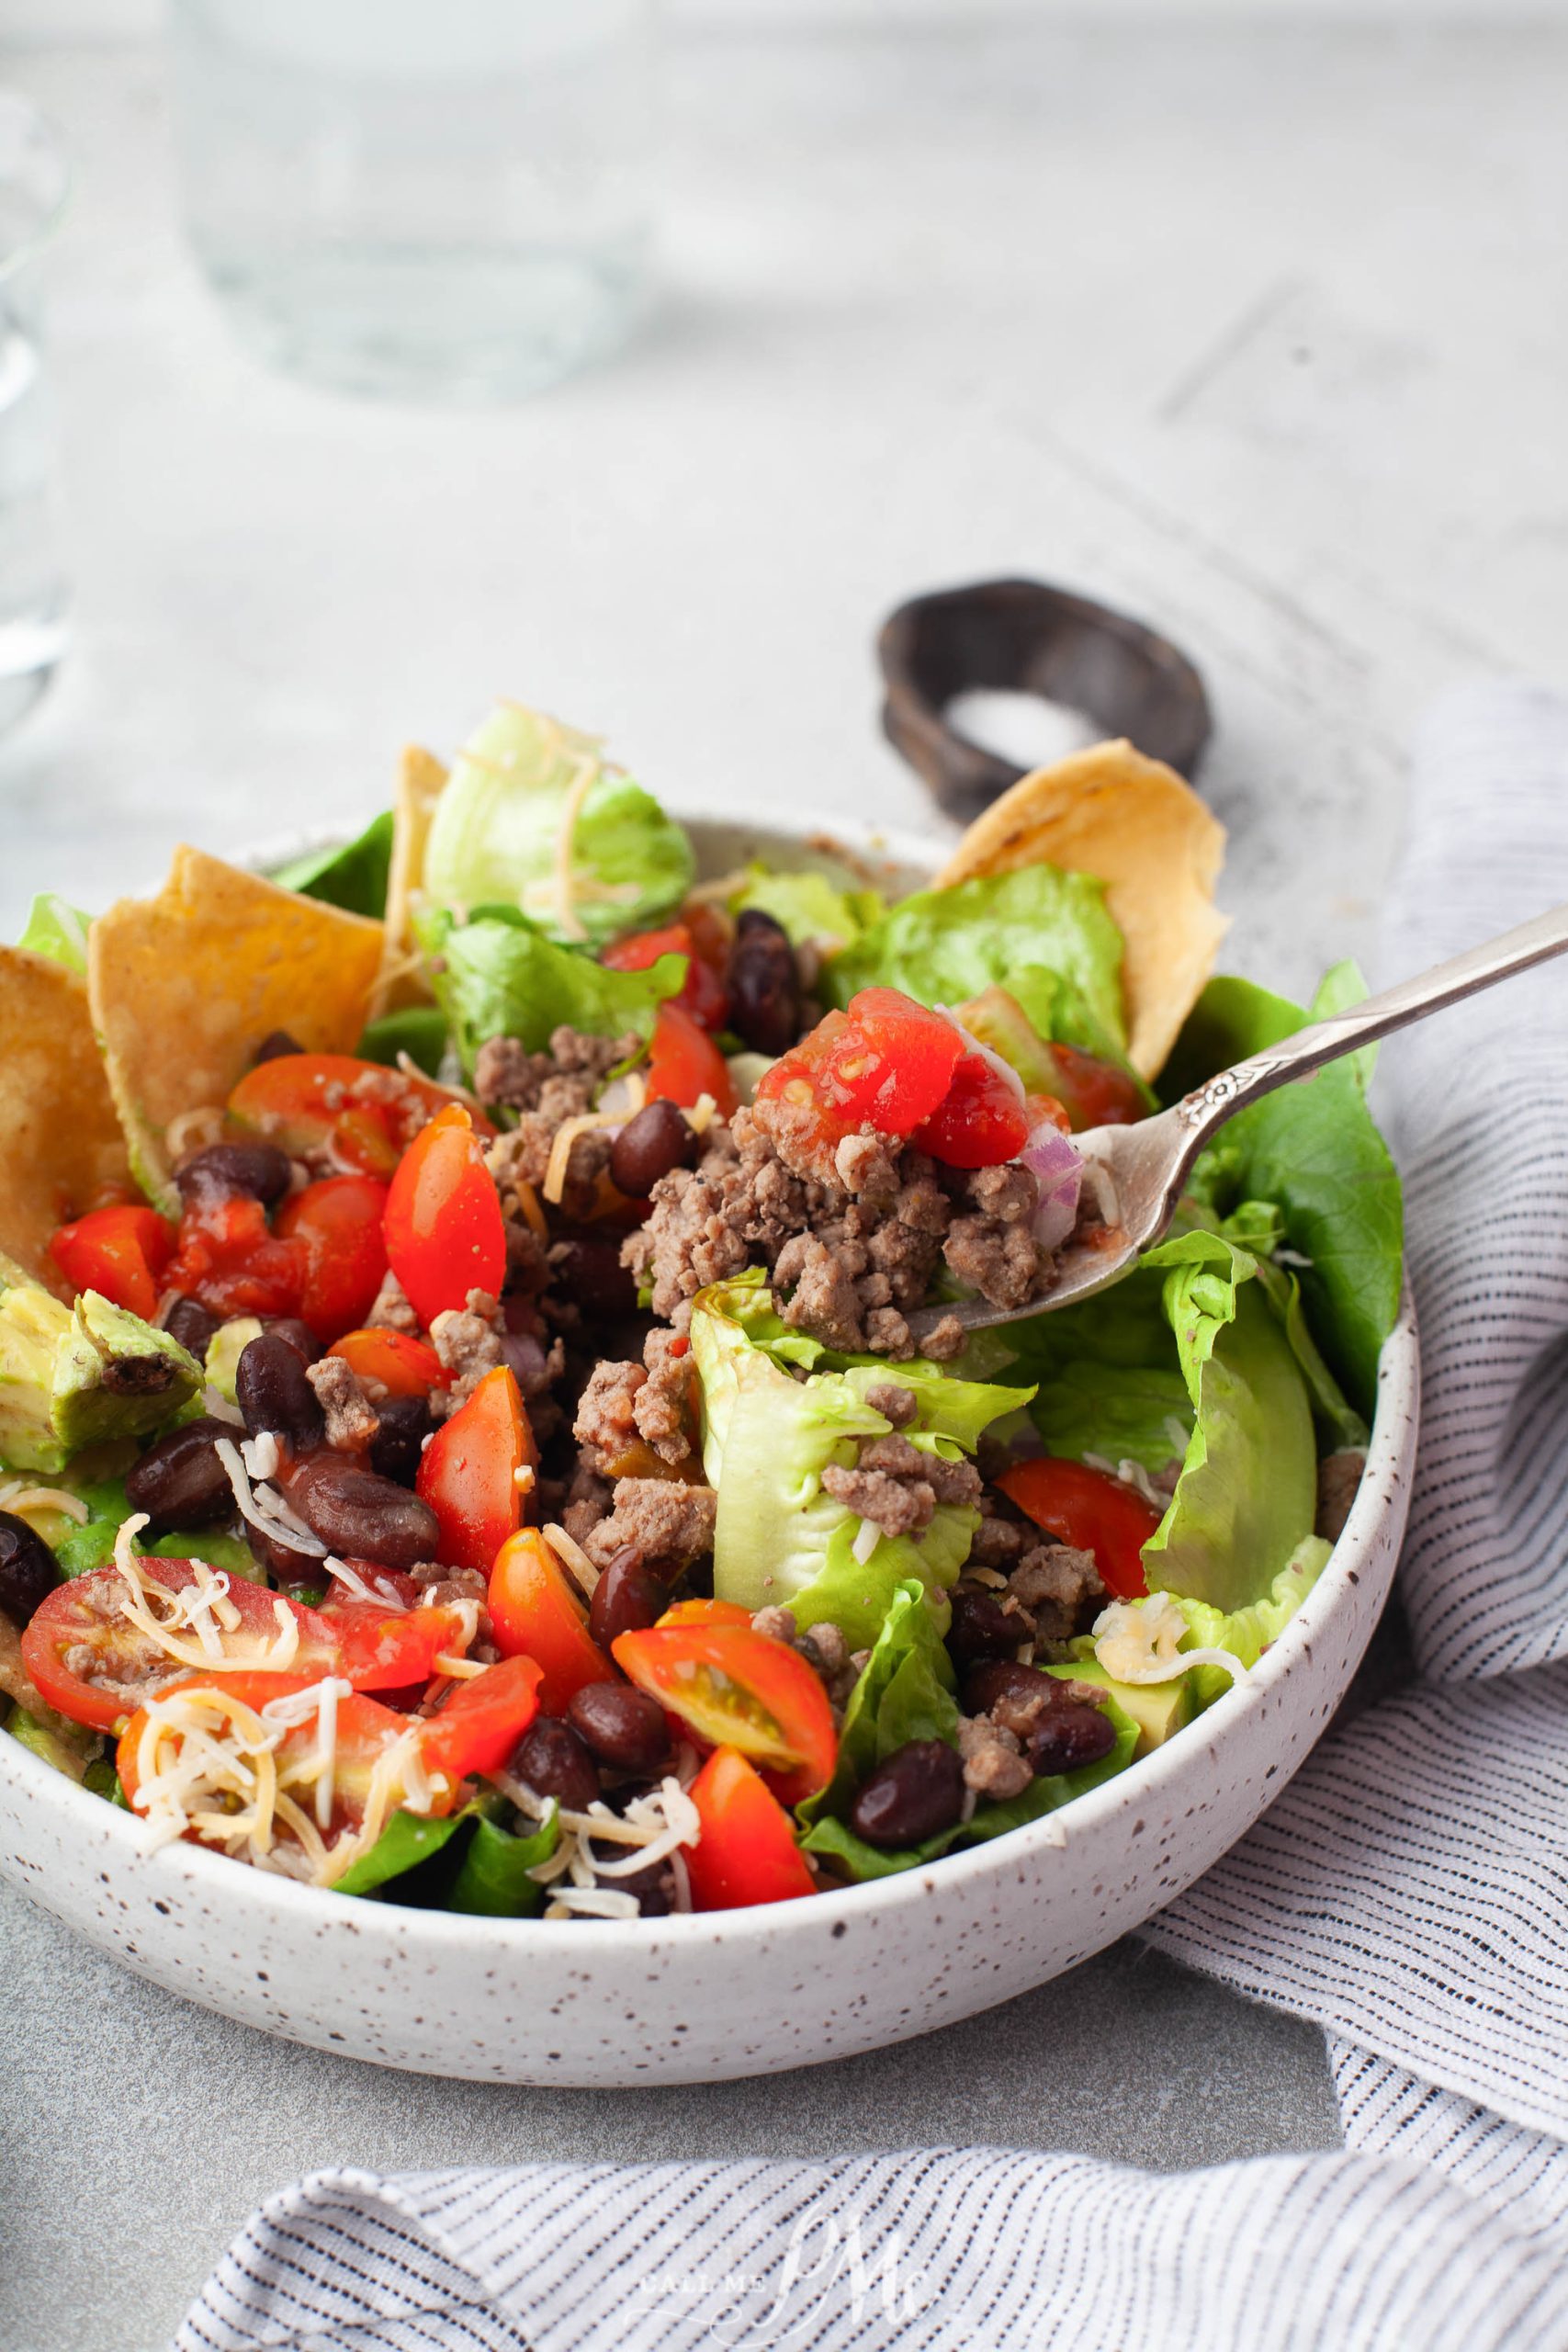 A bowl of salad with meat, tomatoes, lettuce and tortilla chips.